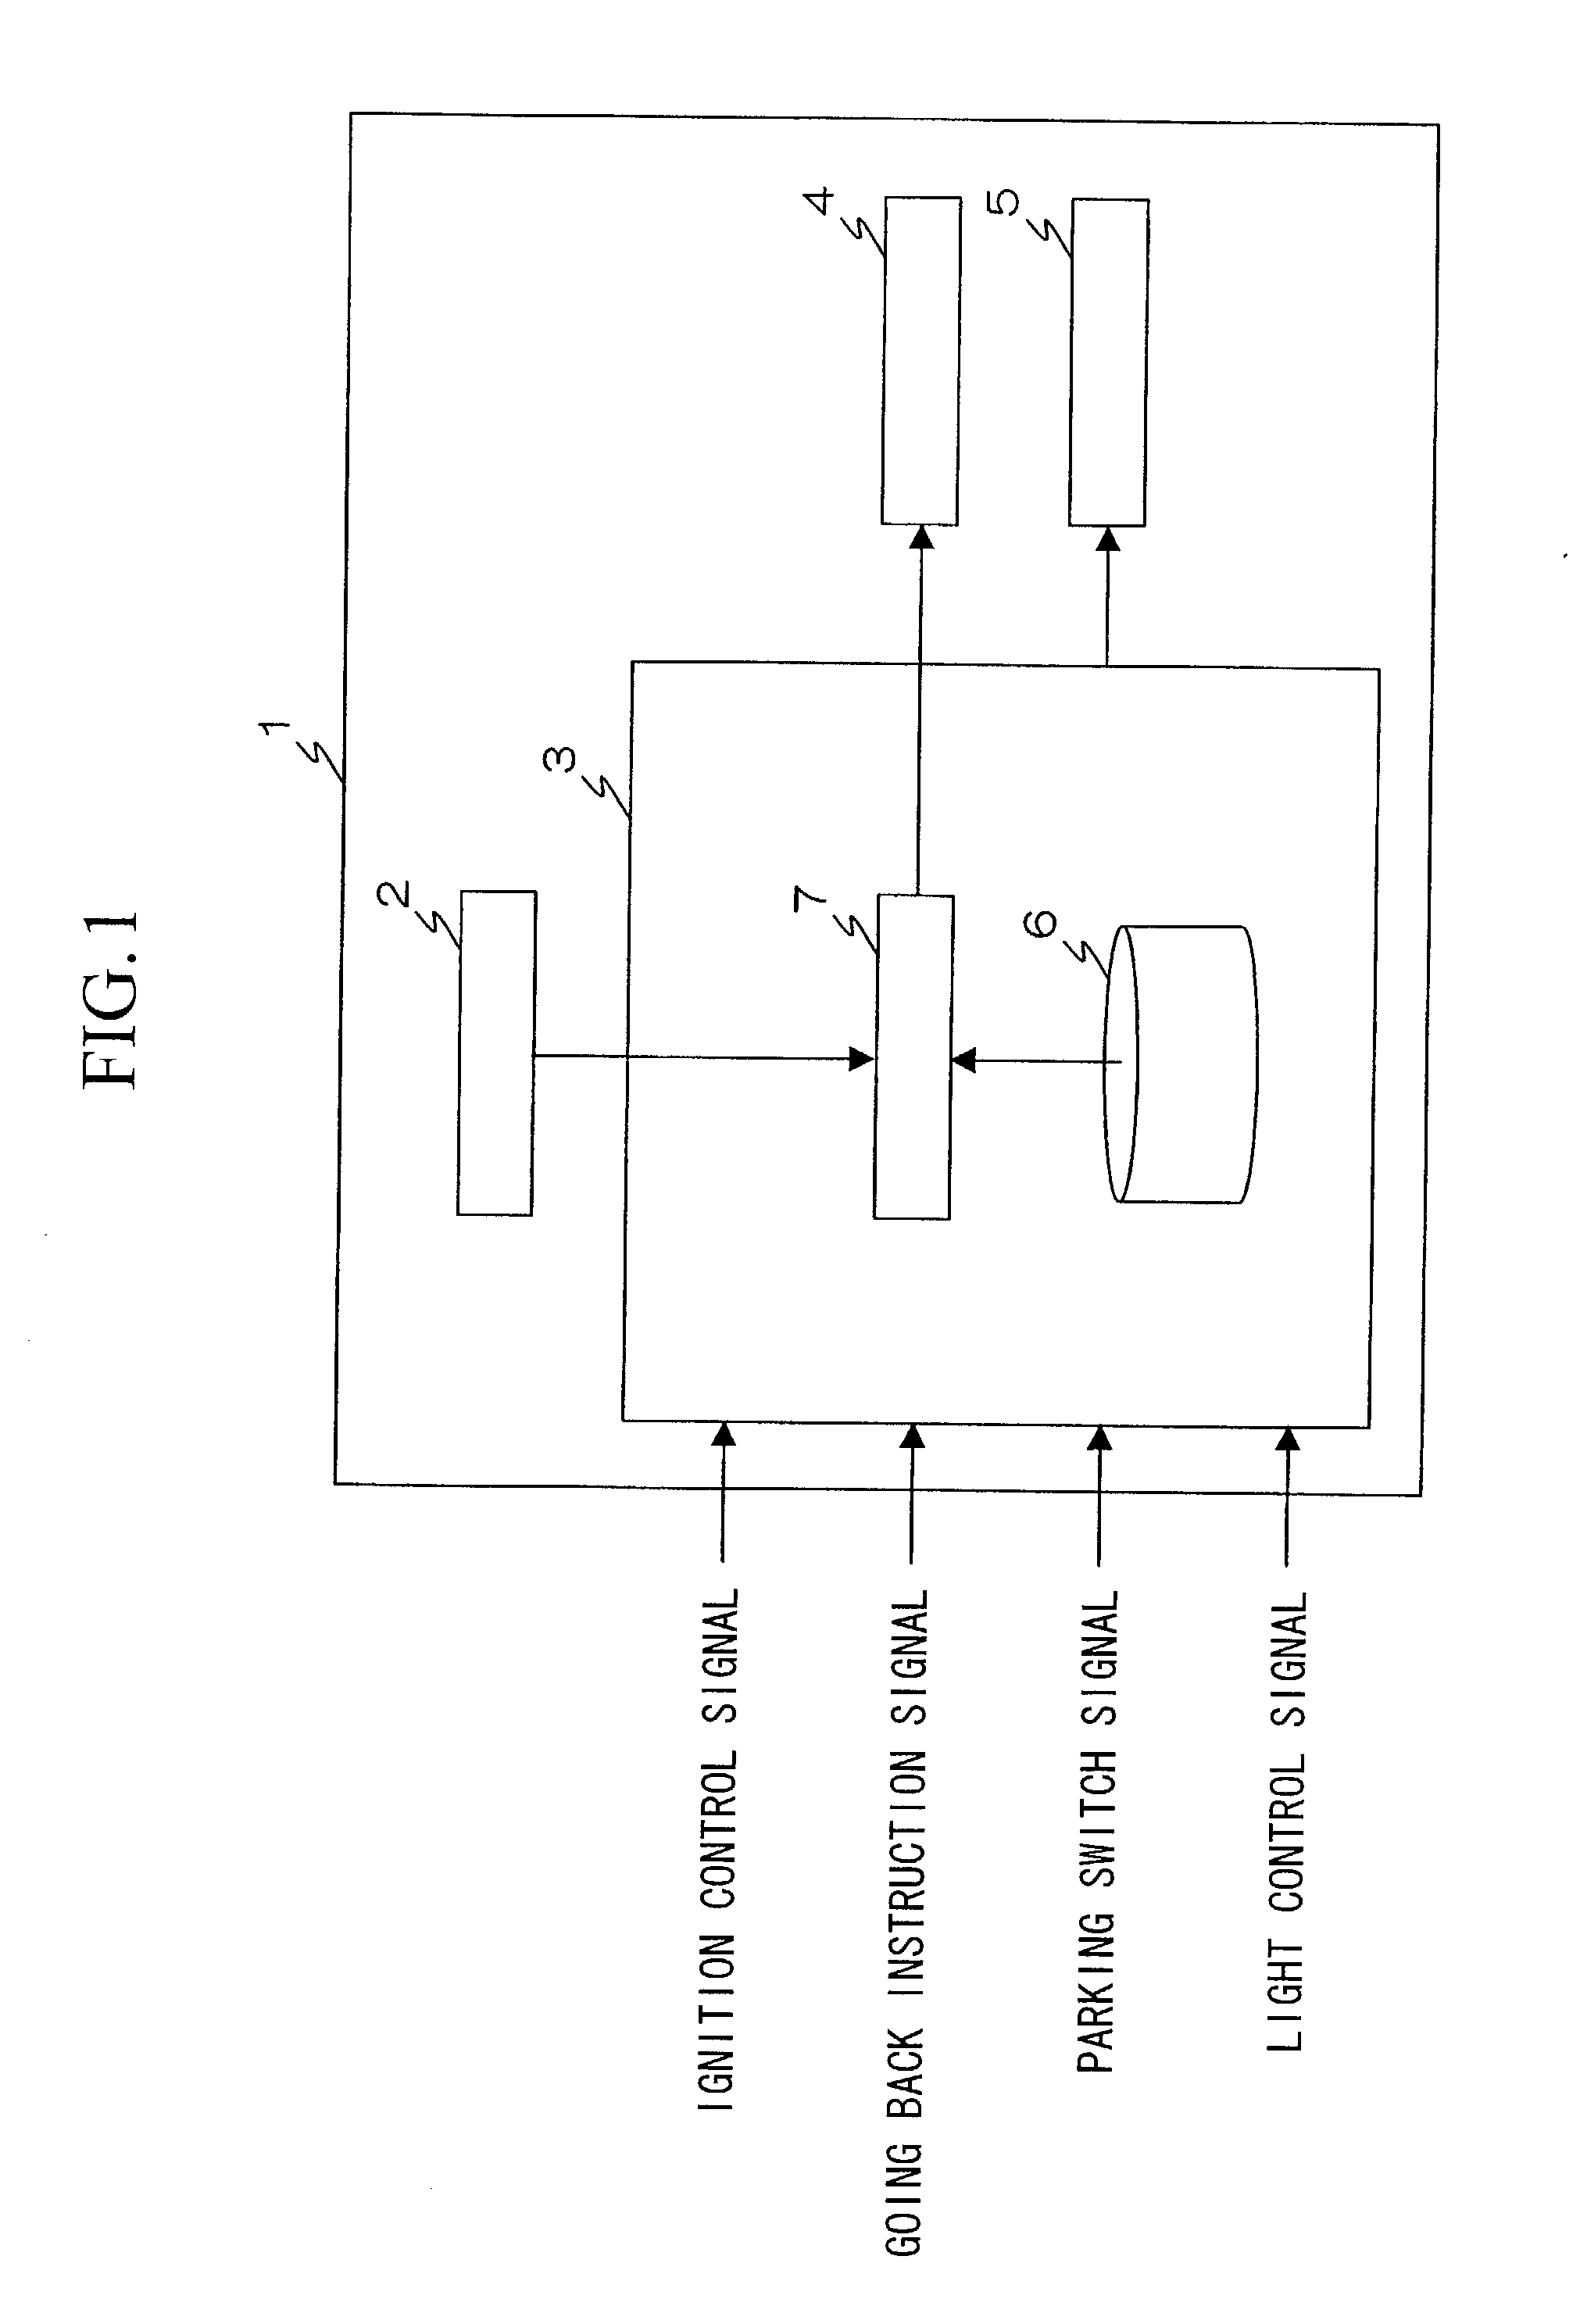 Rearview monitoring apparatus for vehicle